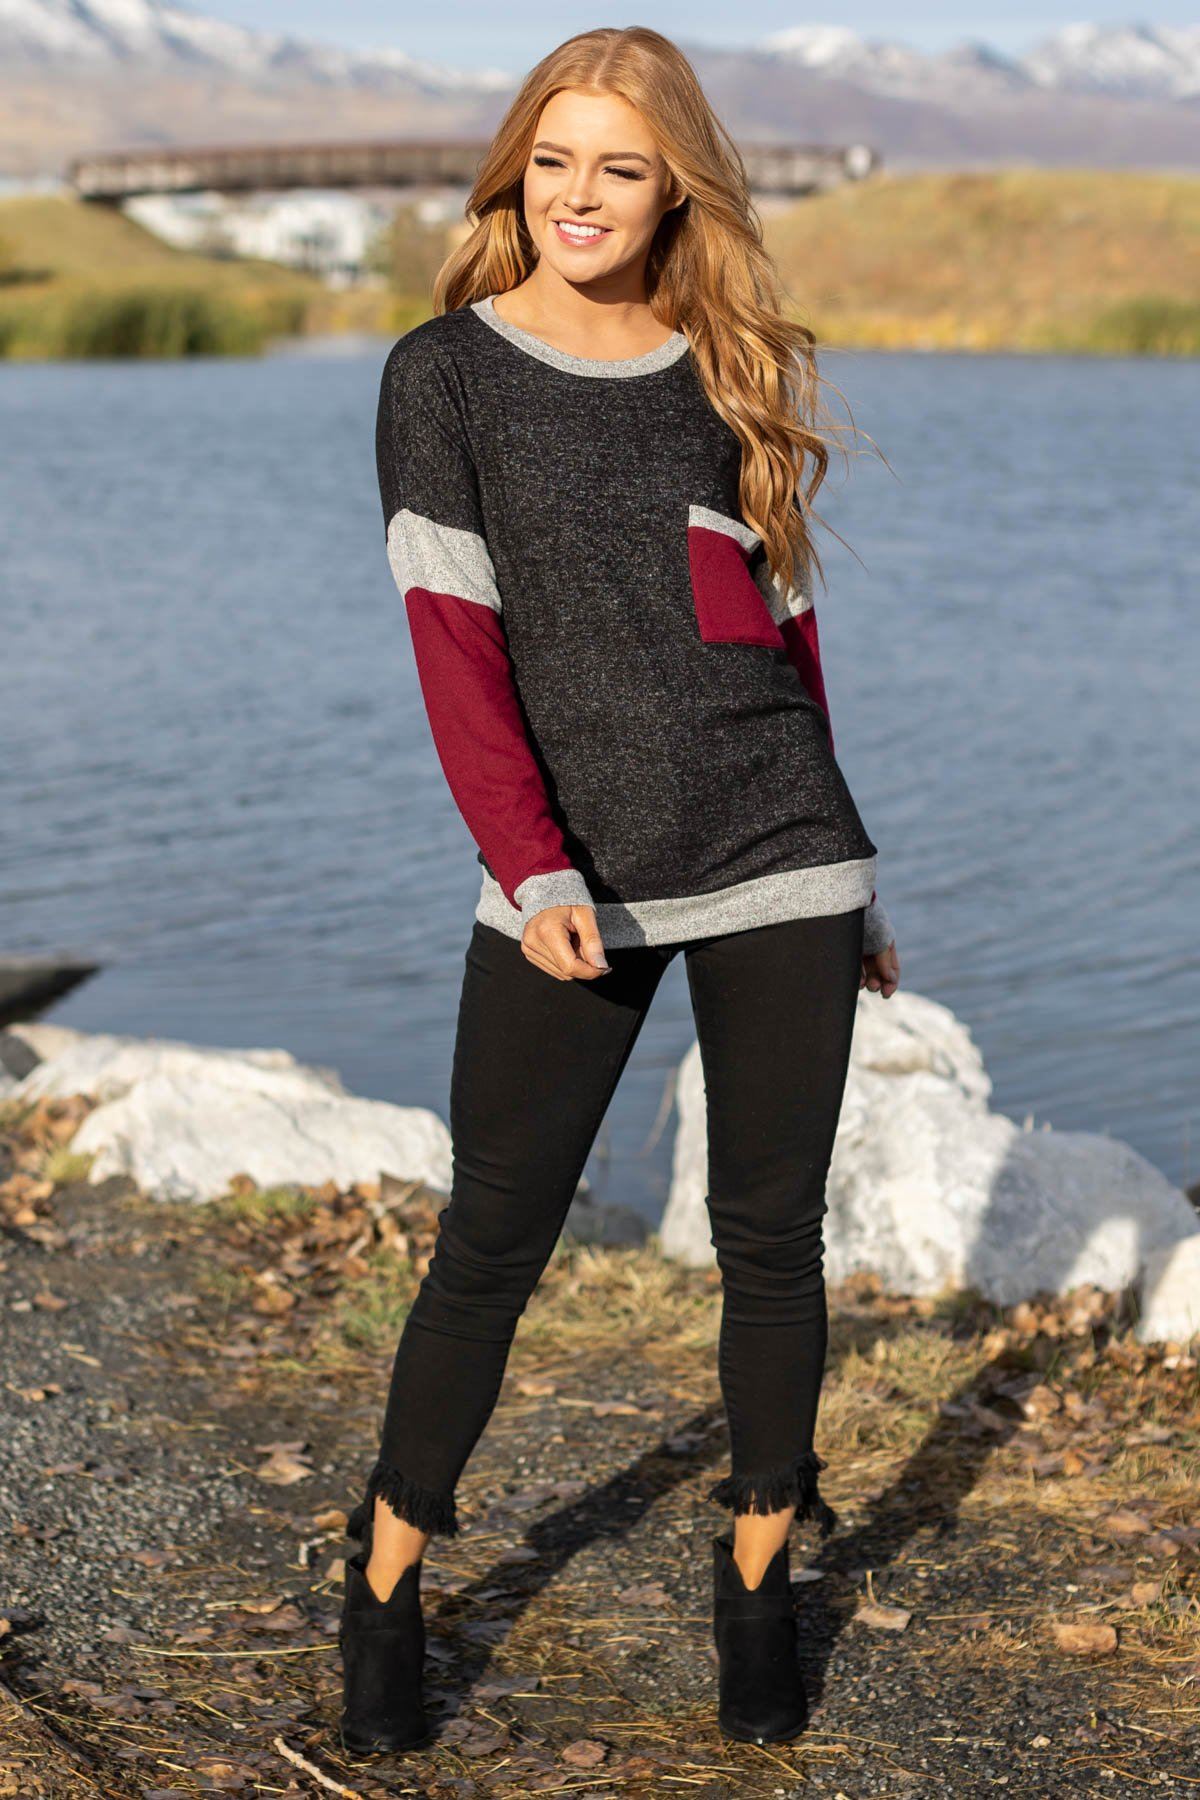 Charcoal and Burgundy Colorblock Top - Filly Flair